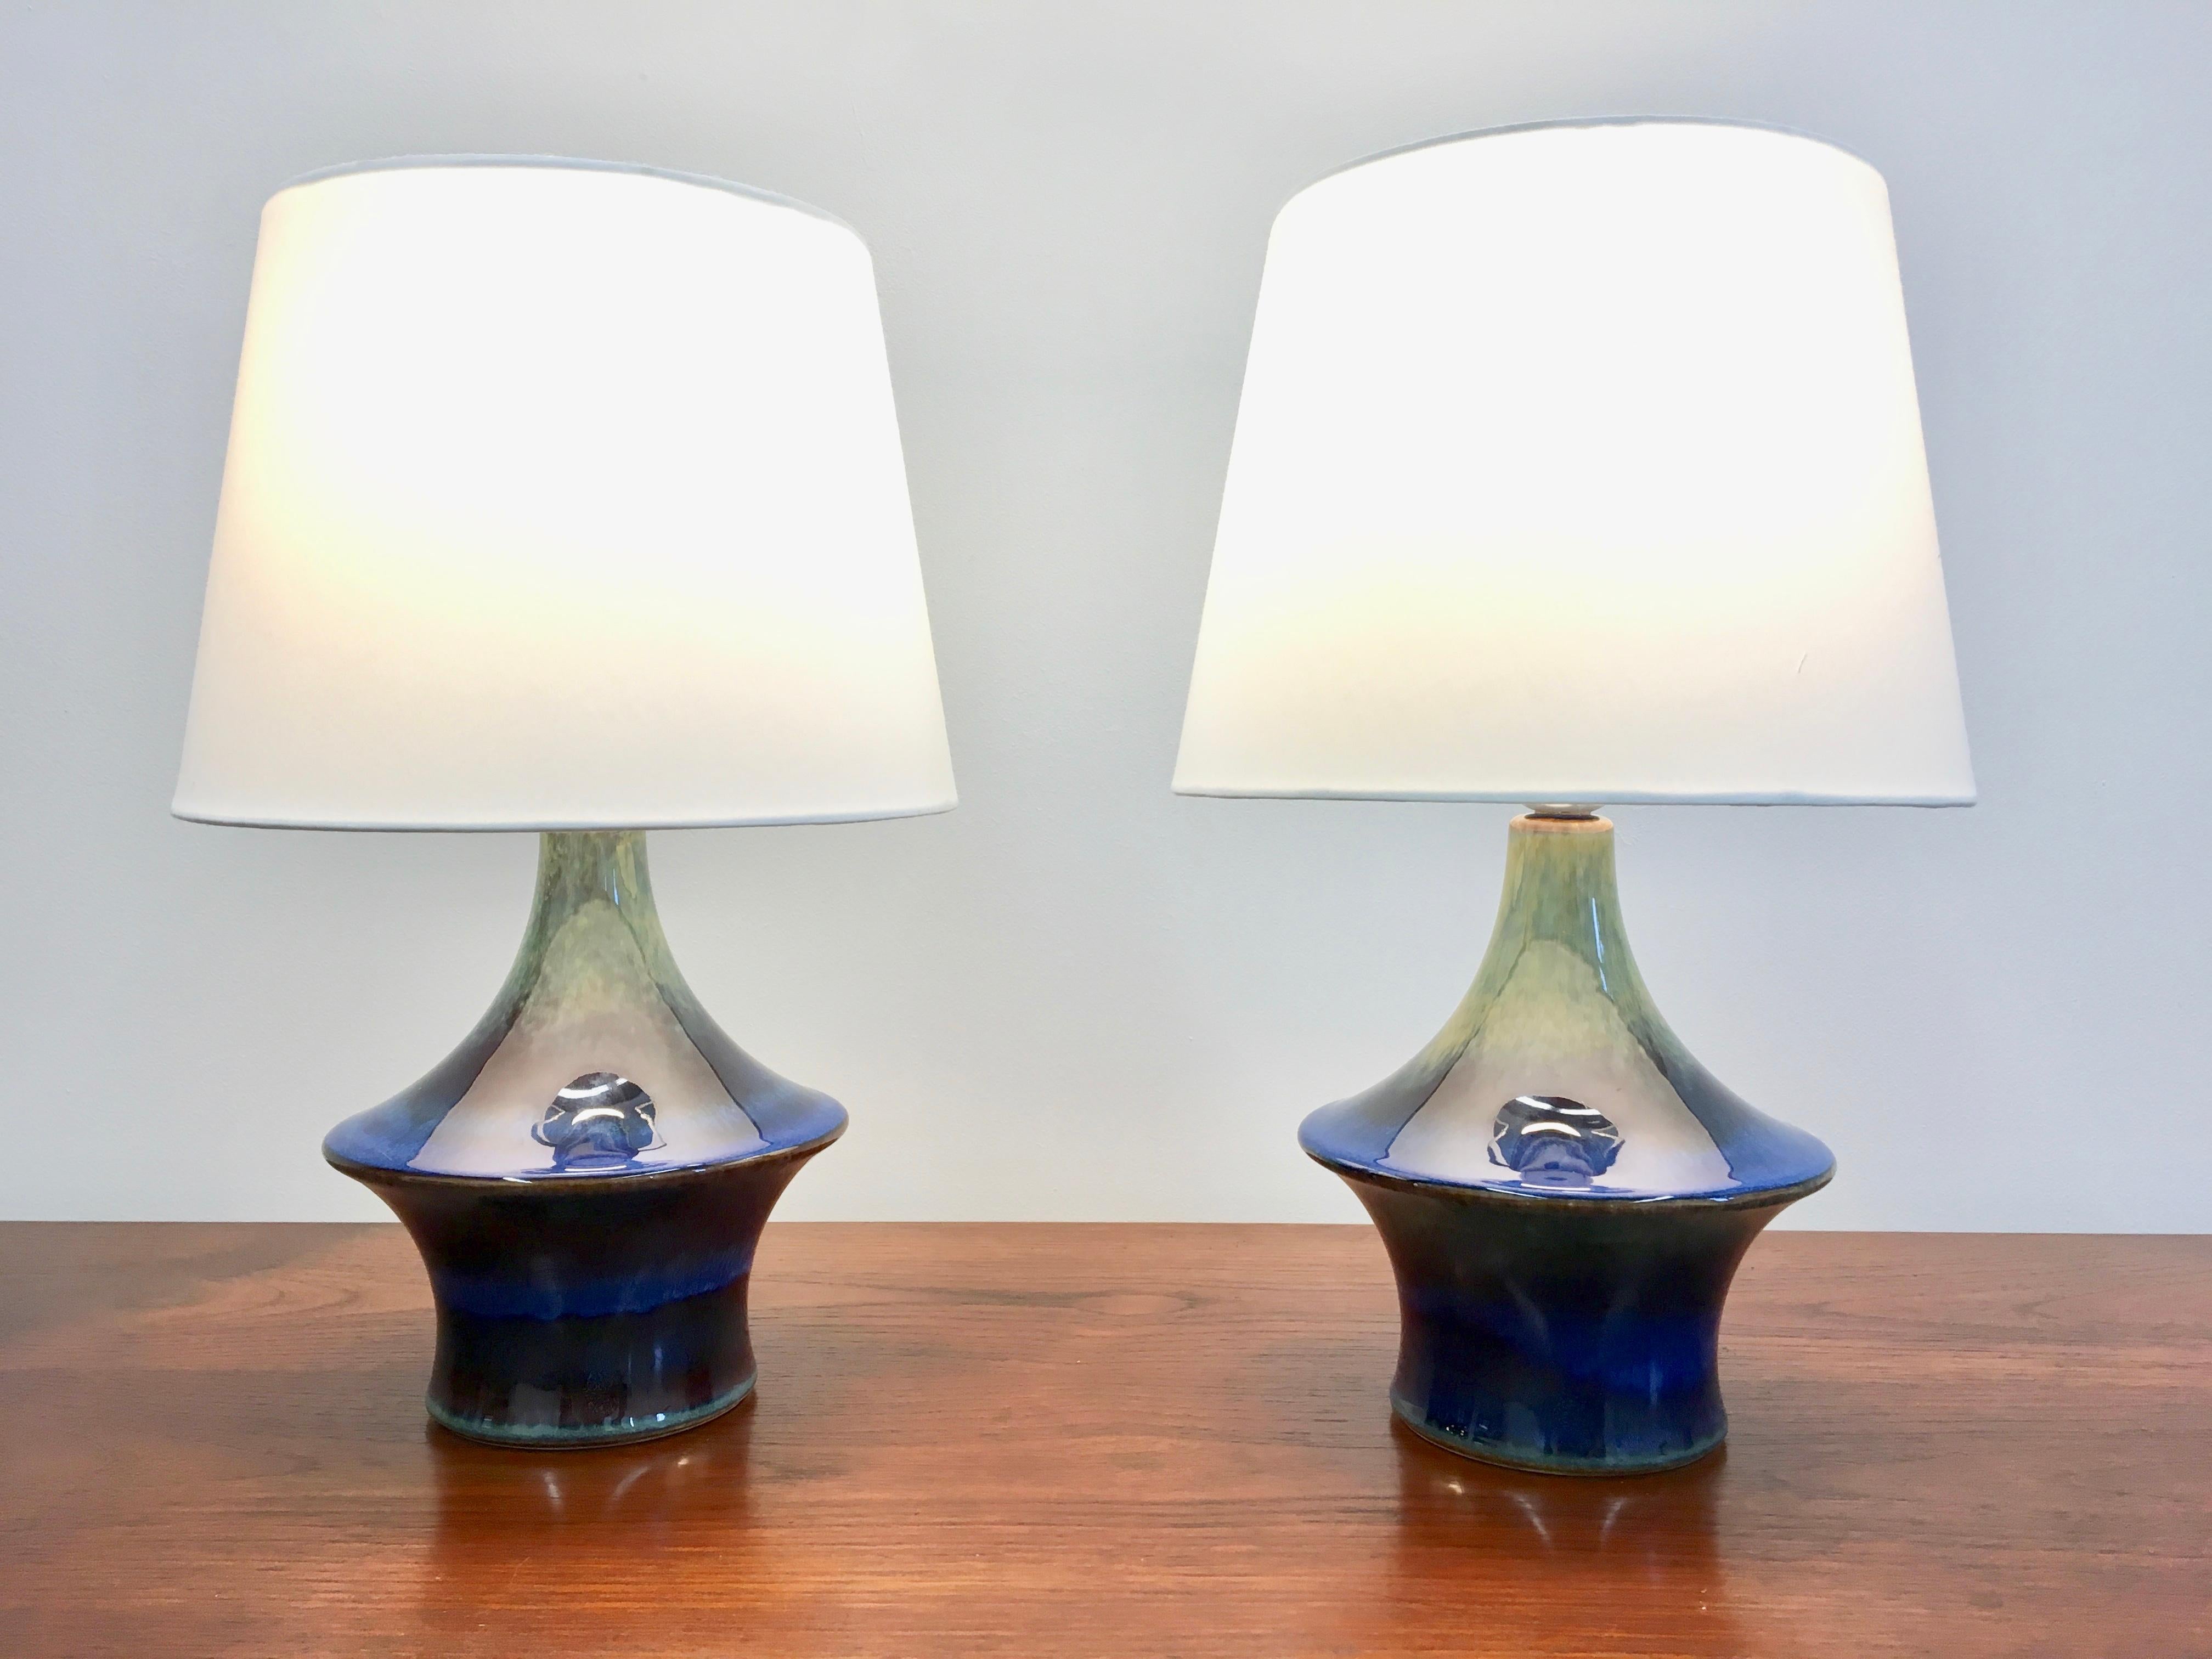 20th Century Pair of Blue Danish Ceramic Table Lamps by Soholm, 1960s